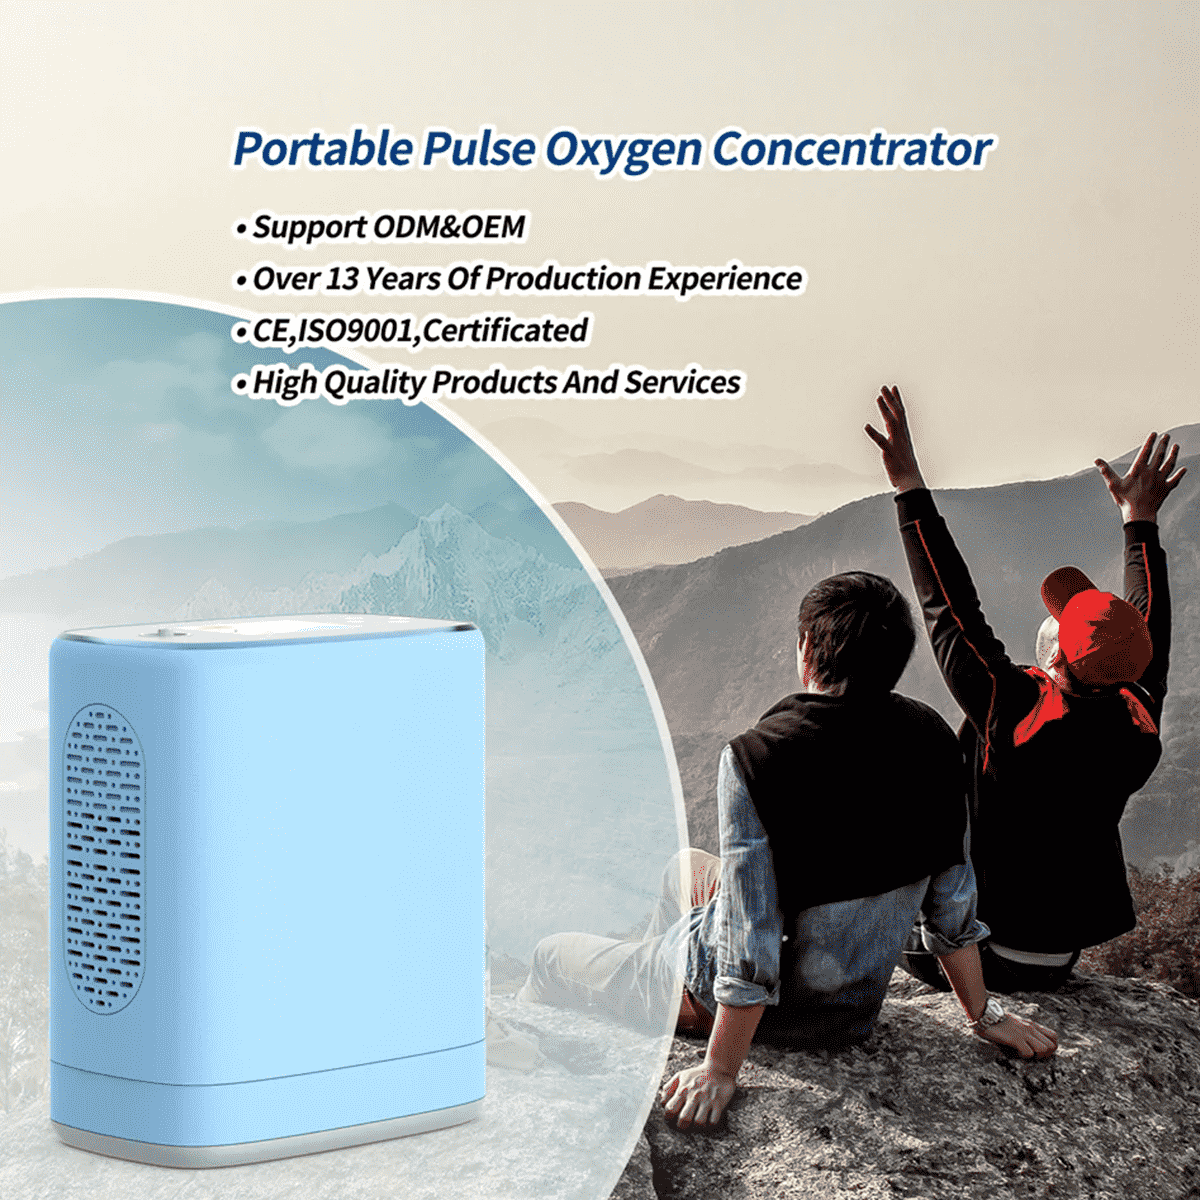 DEDAKJ Handheld Mini Portable Oxygen Cocnentrator 3 Liter Mobile Lightweight Continues Oxygen Making Generator Machine for Outdoor Travel Shopping, with Rechargeable Lithium Battery and Backpack